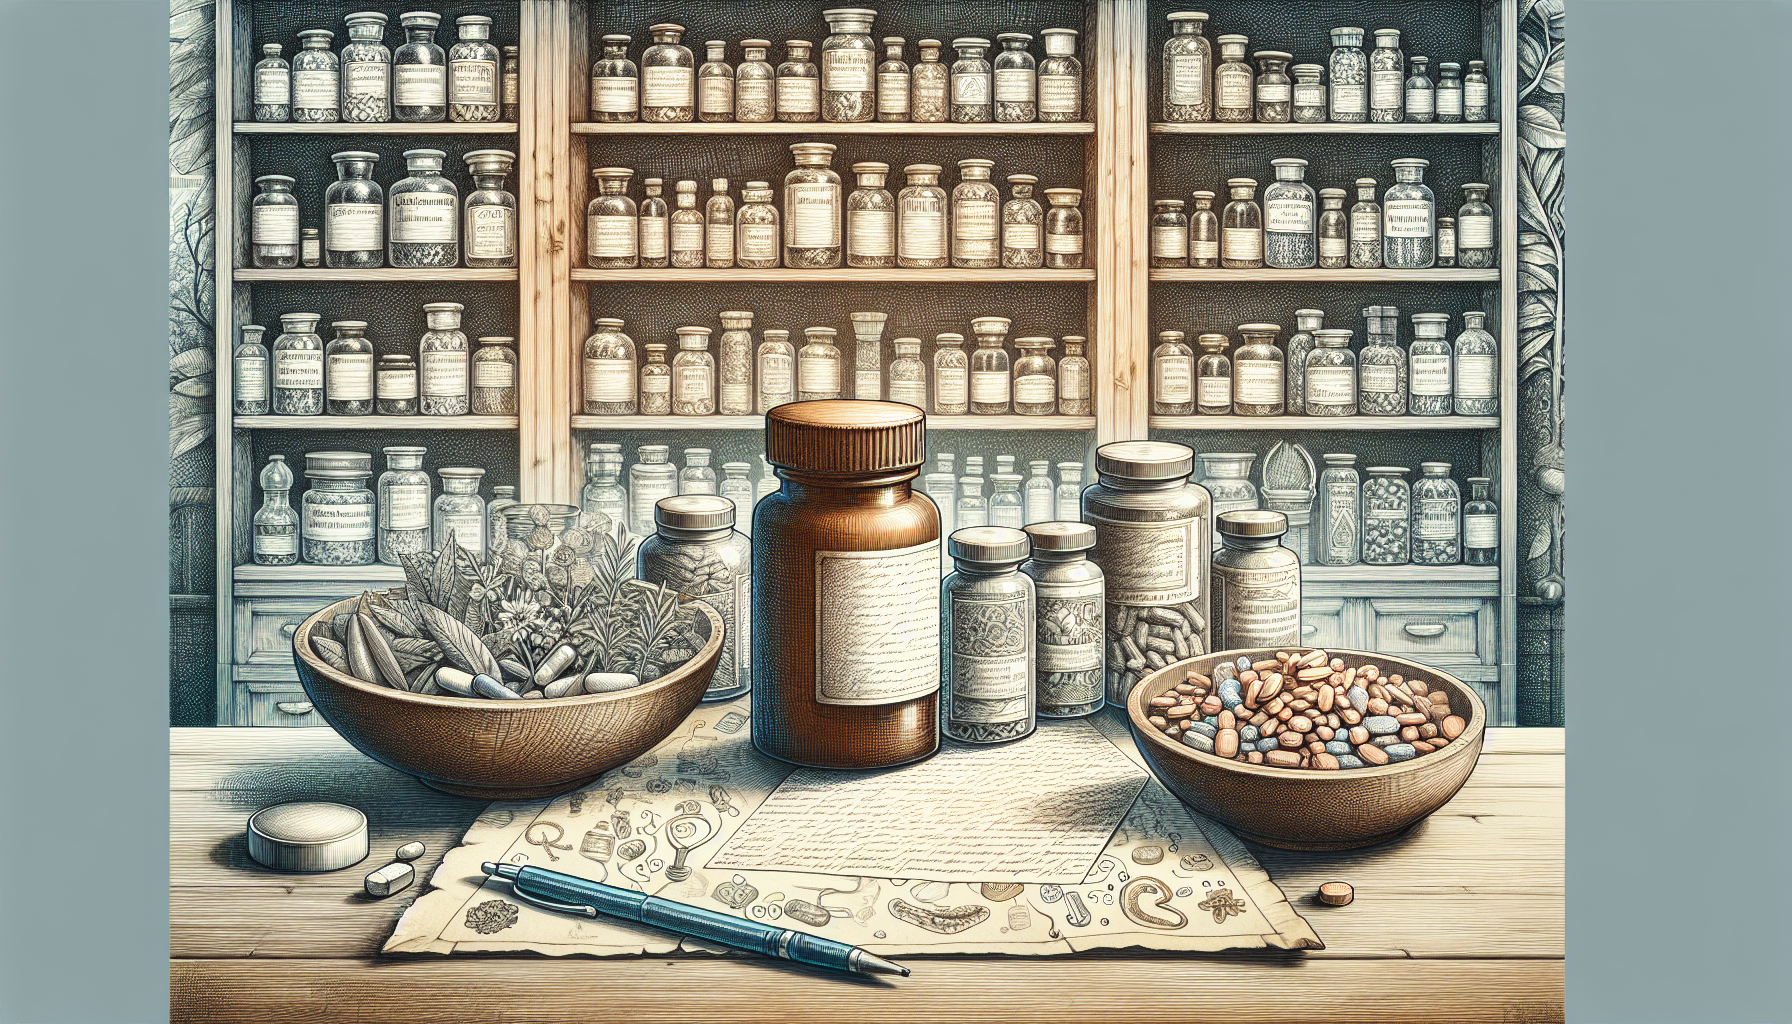 Herbal medicines and supplements